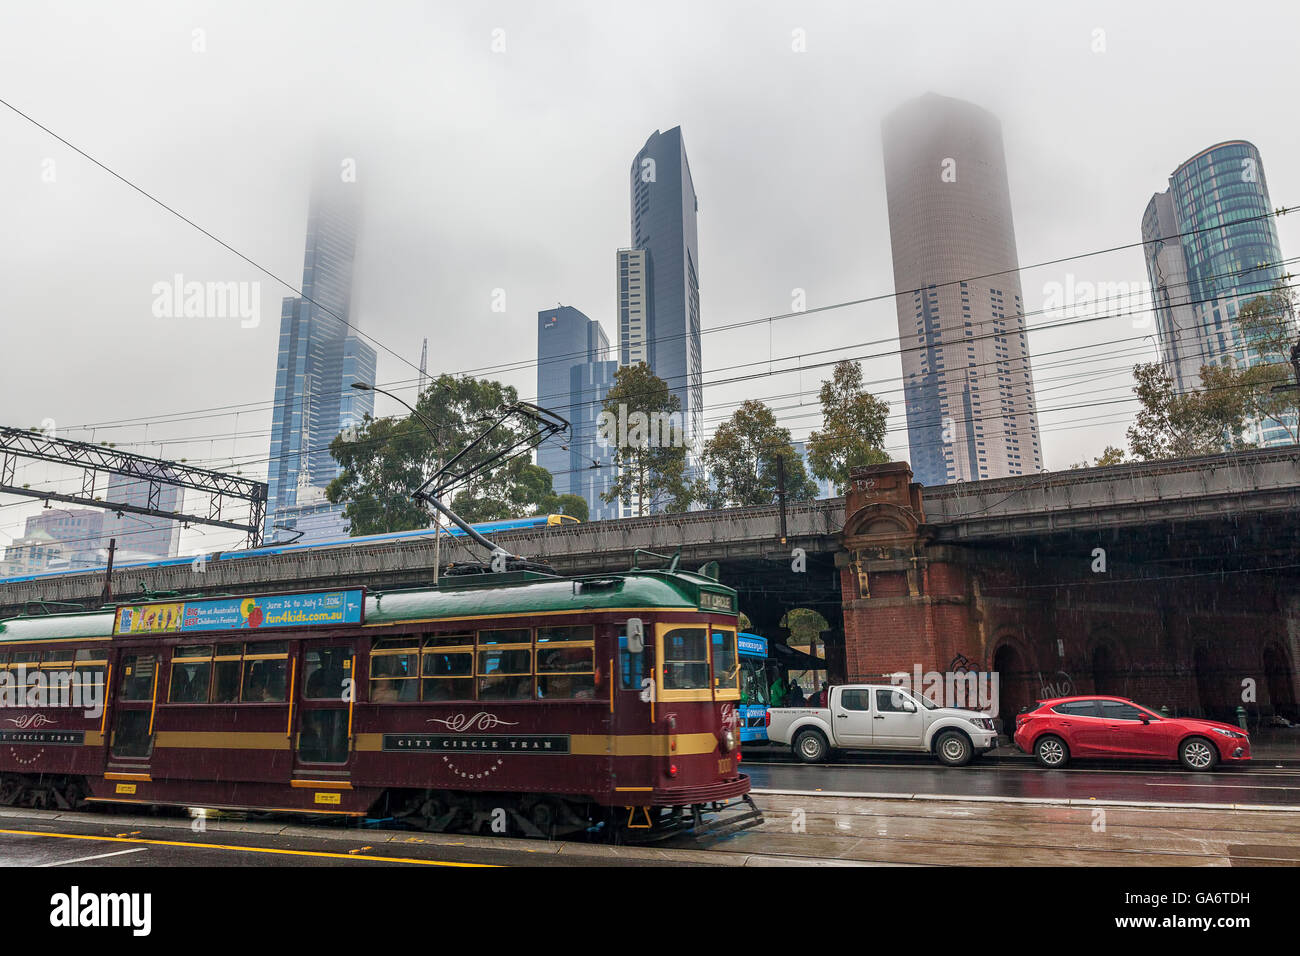 Melbourne CBD - Jun 4 2016: historical City Circle Tram and skyscrapers disappearing into the fog on cloudy rainy day. Stock Photo